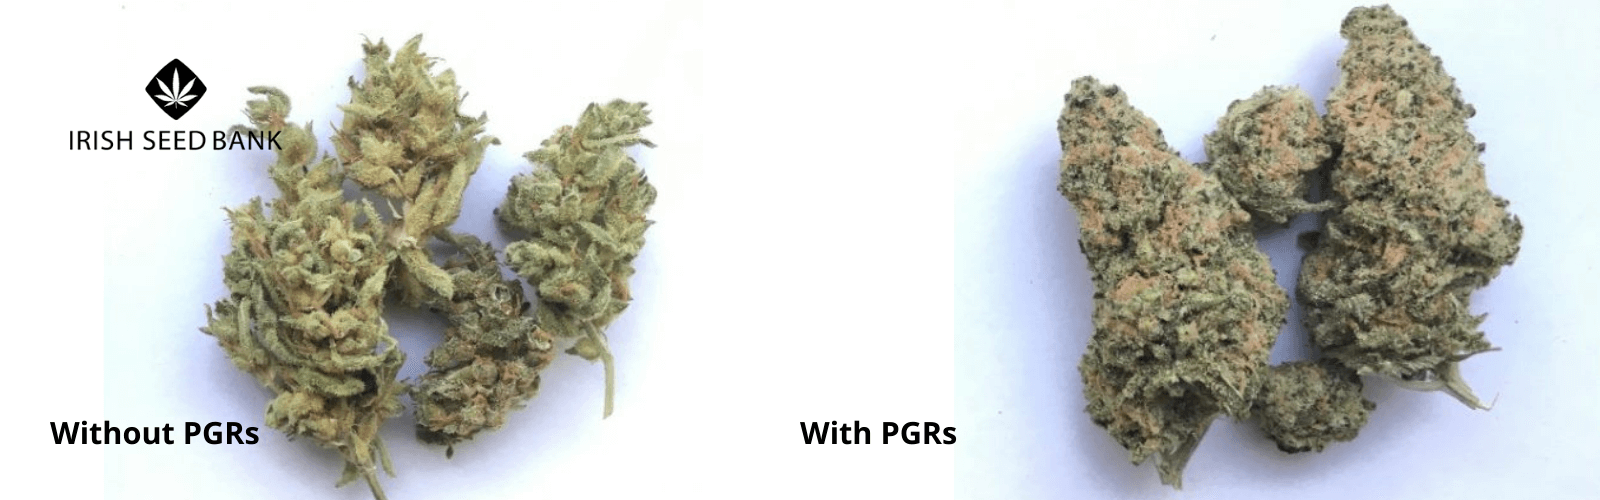 why use PGRs when growing